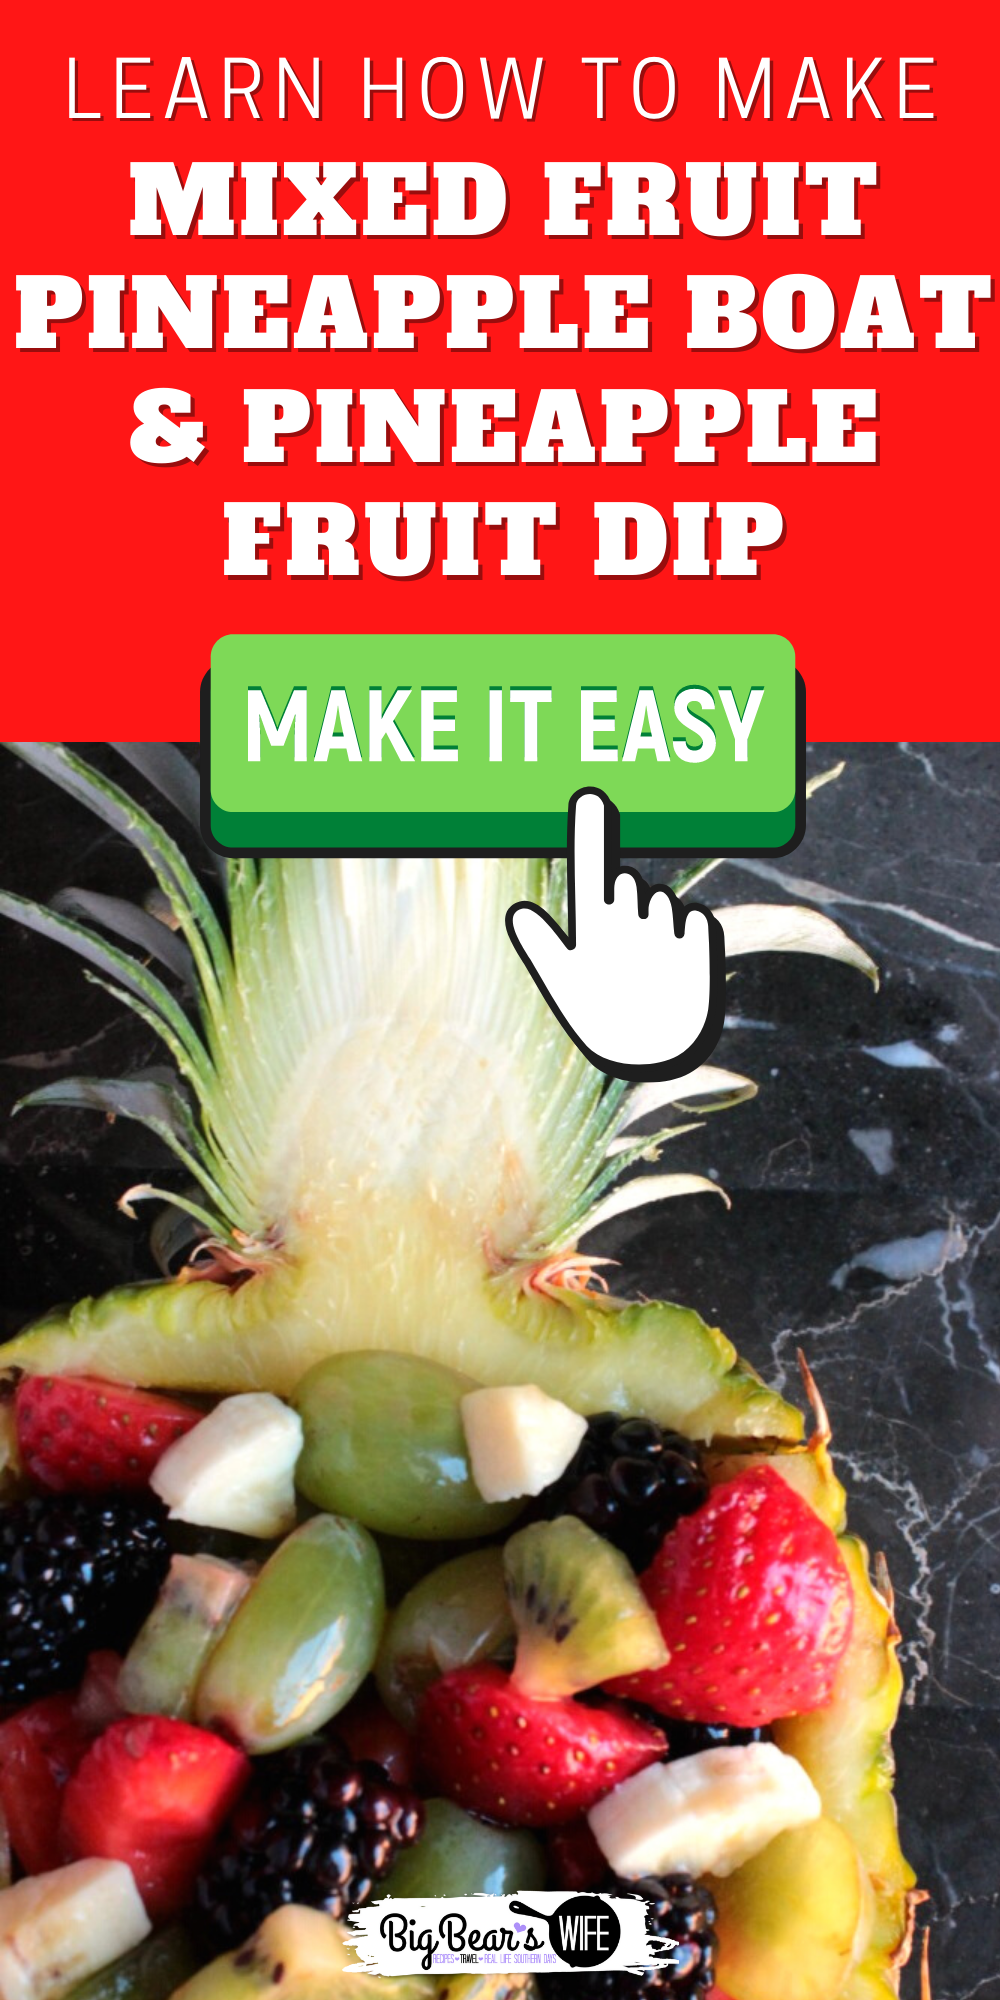 Mixed fruit served in a fresh pineapple with an easy to whip up pineapple marshmallow dip! A Mixed Fruit Pineapple Boat is great for parties! via @bigbearswife